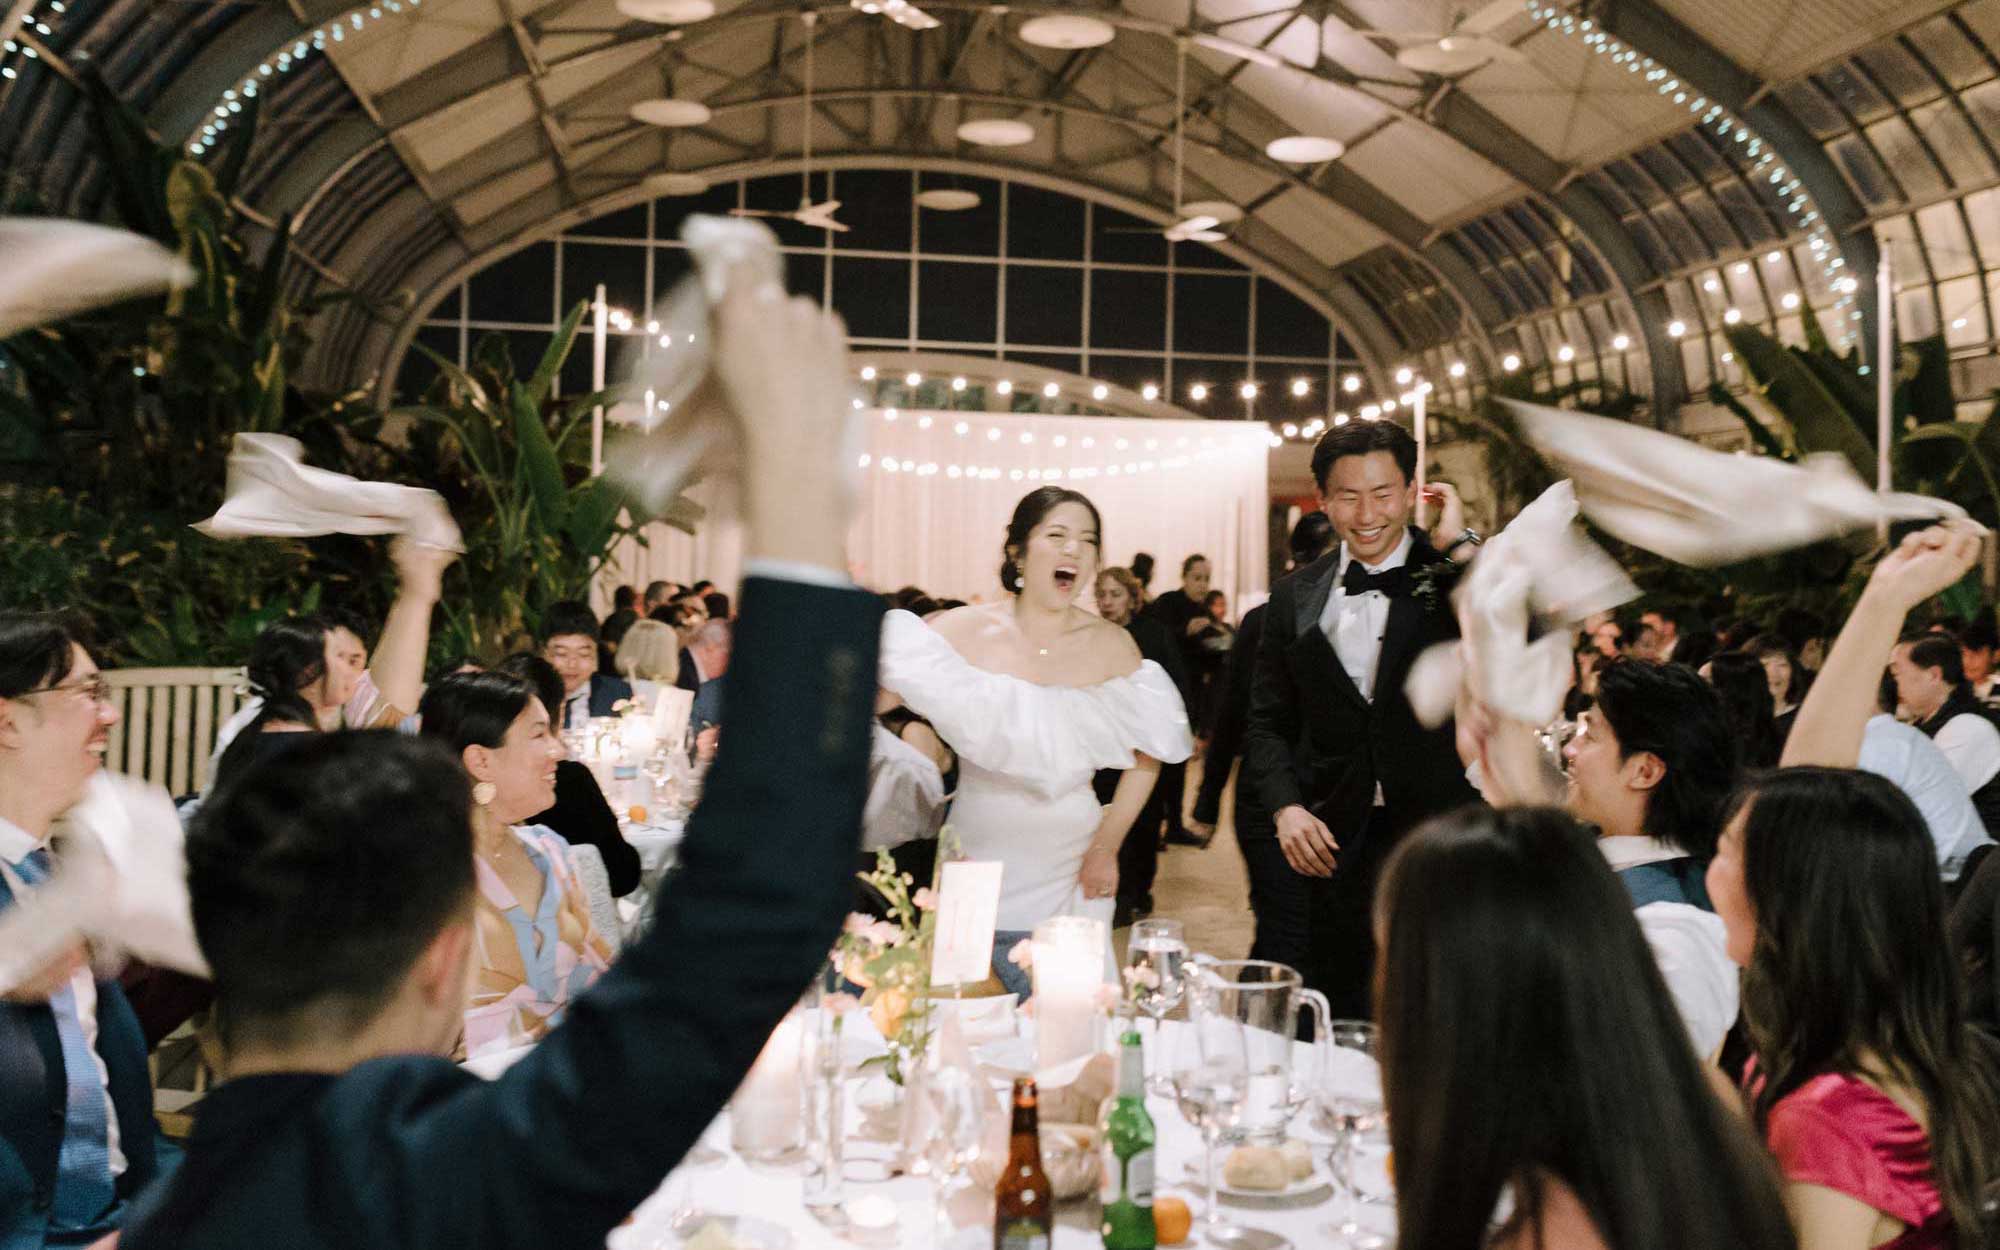 A happy couple walks through a cheering crowd at a wedding reception while guests wave their napkins in celebration.